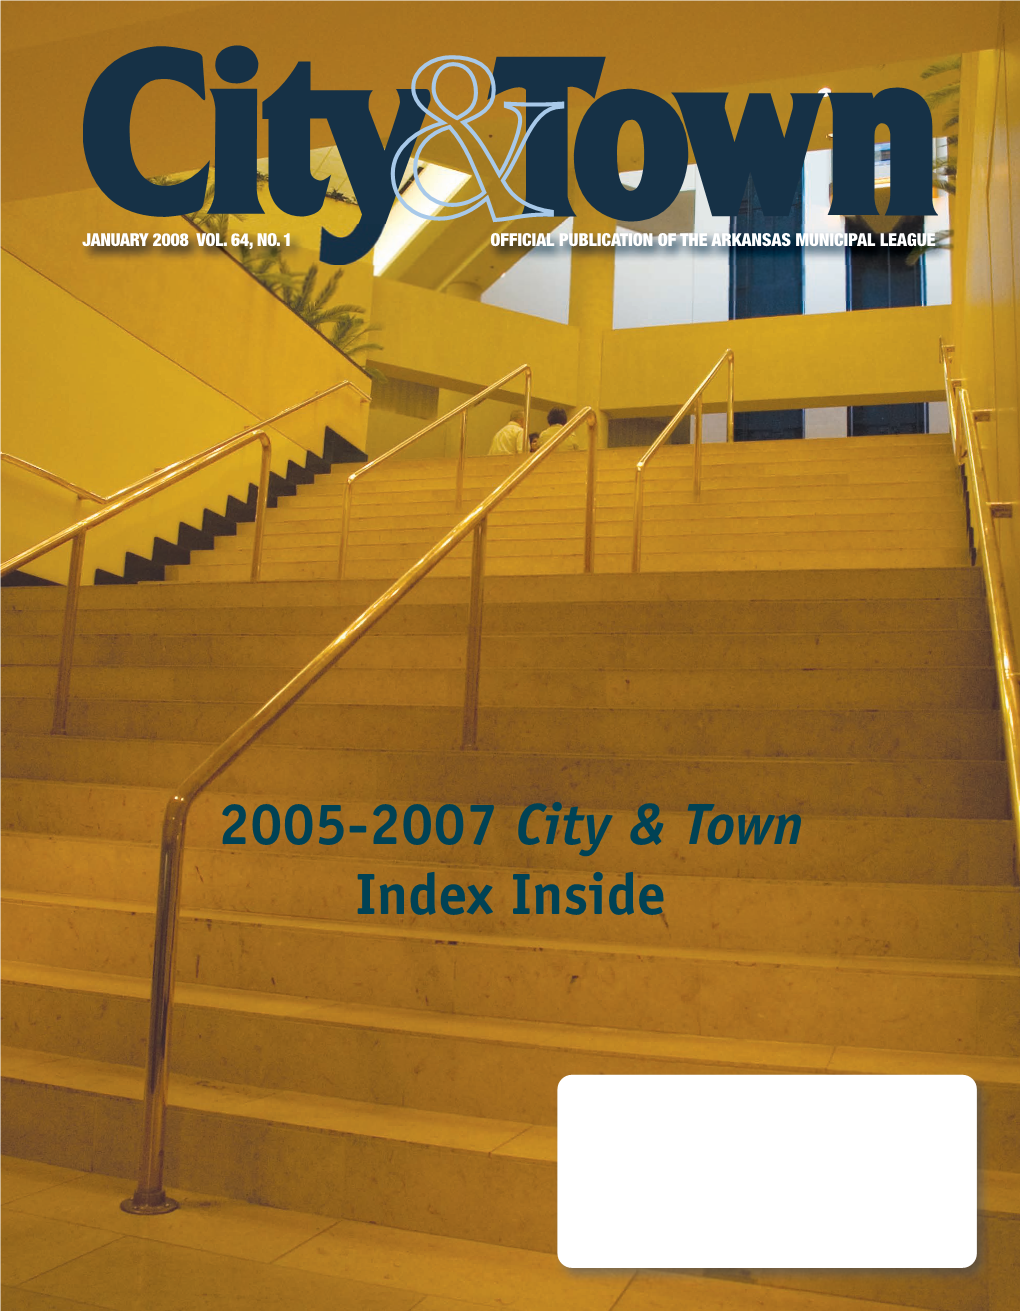 2005-2007 City & Town Index Inside